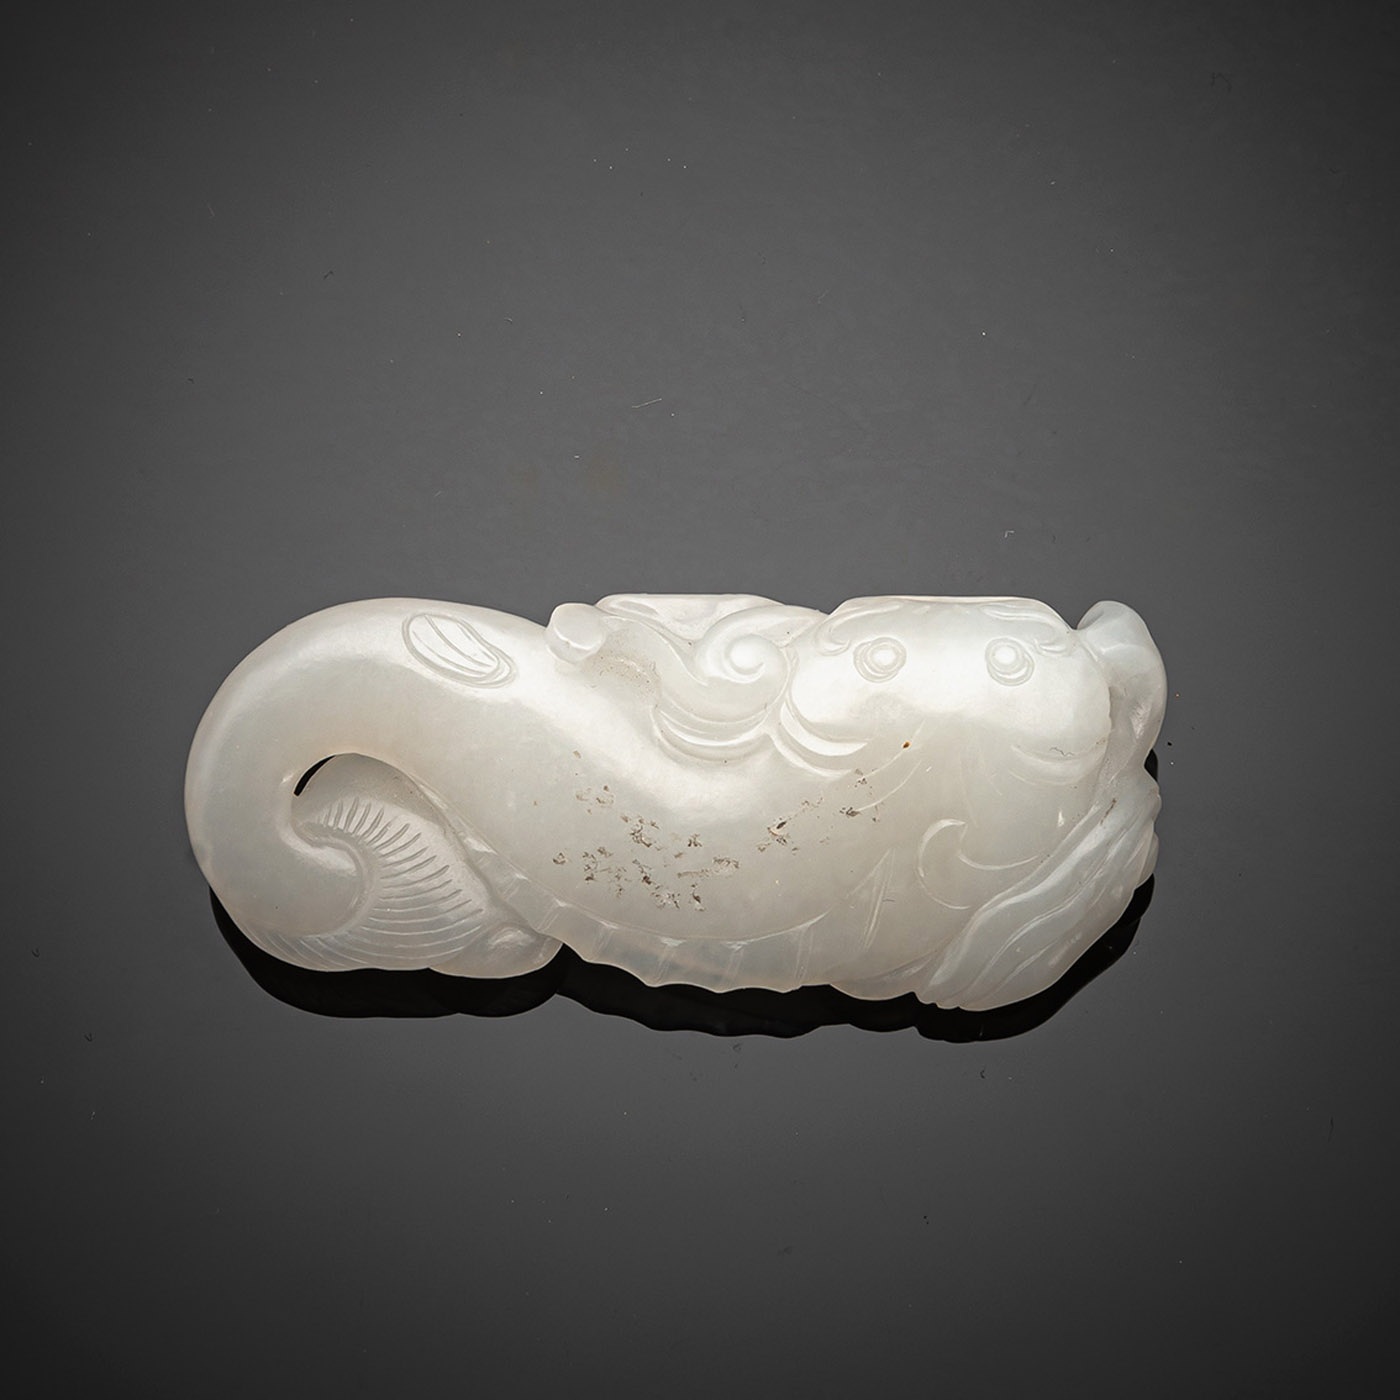 <b>A FINE CARVED WHITE JADE PENDANT IN SHAPE OF A CATFISH AND ITS YOUTH WITH LINGZHI</b>